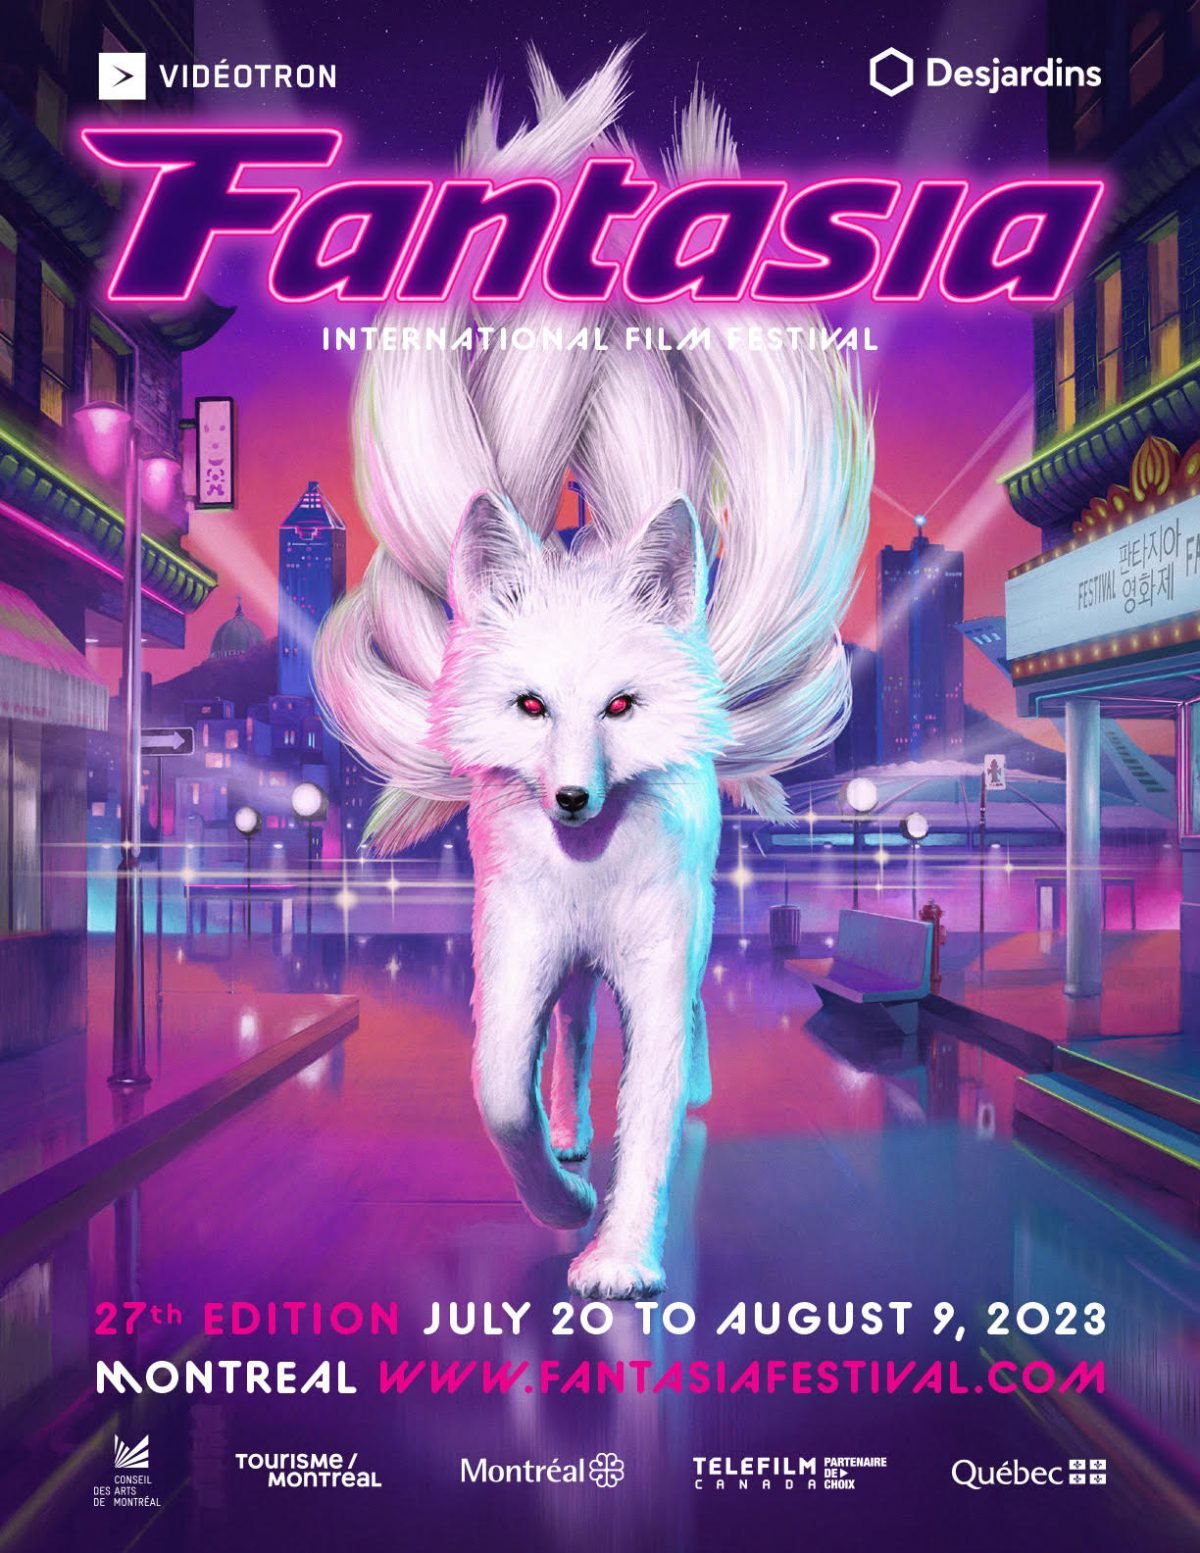 The poster for the 27th Fantasia International Film Festival has a white wolf with many tails and red eyes.